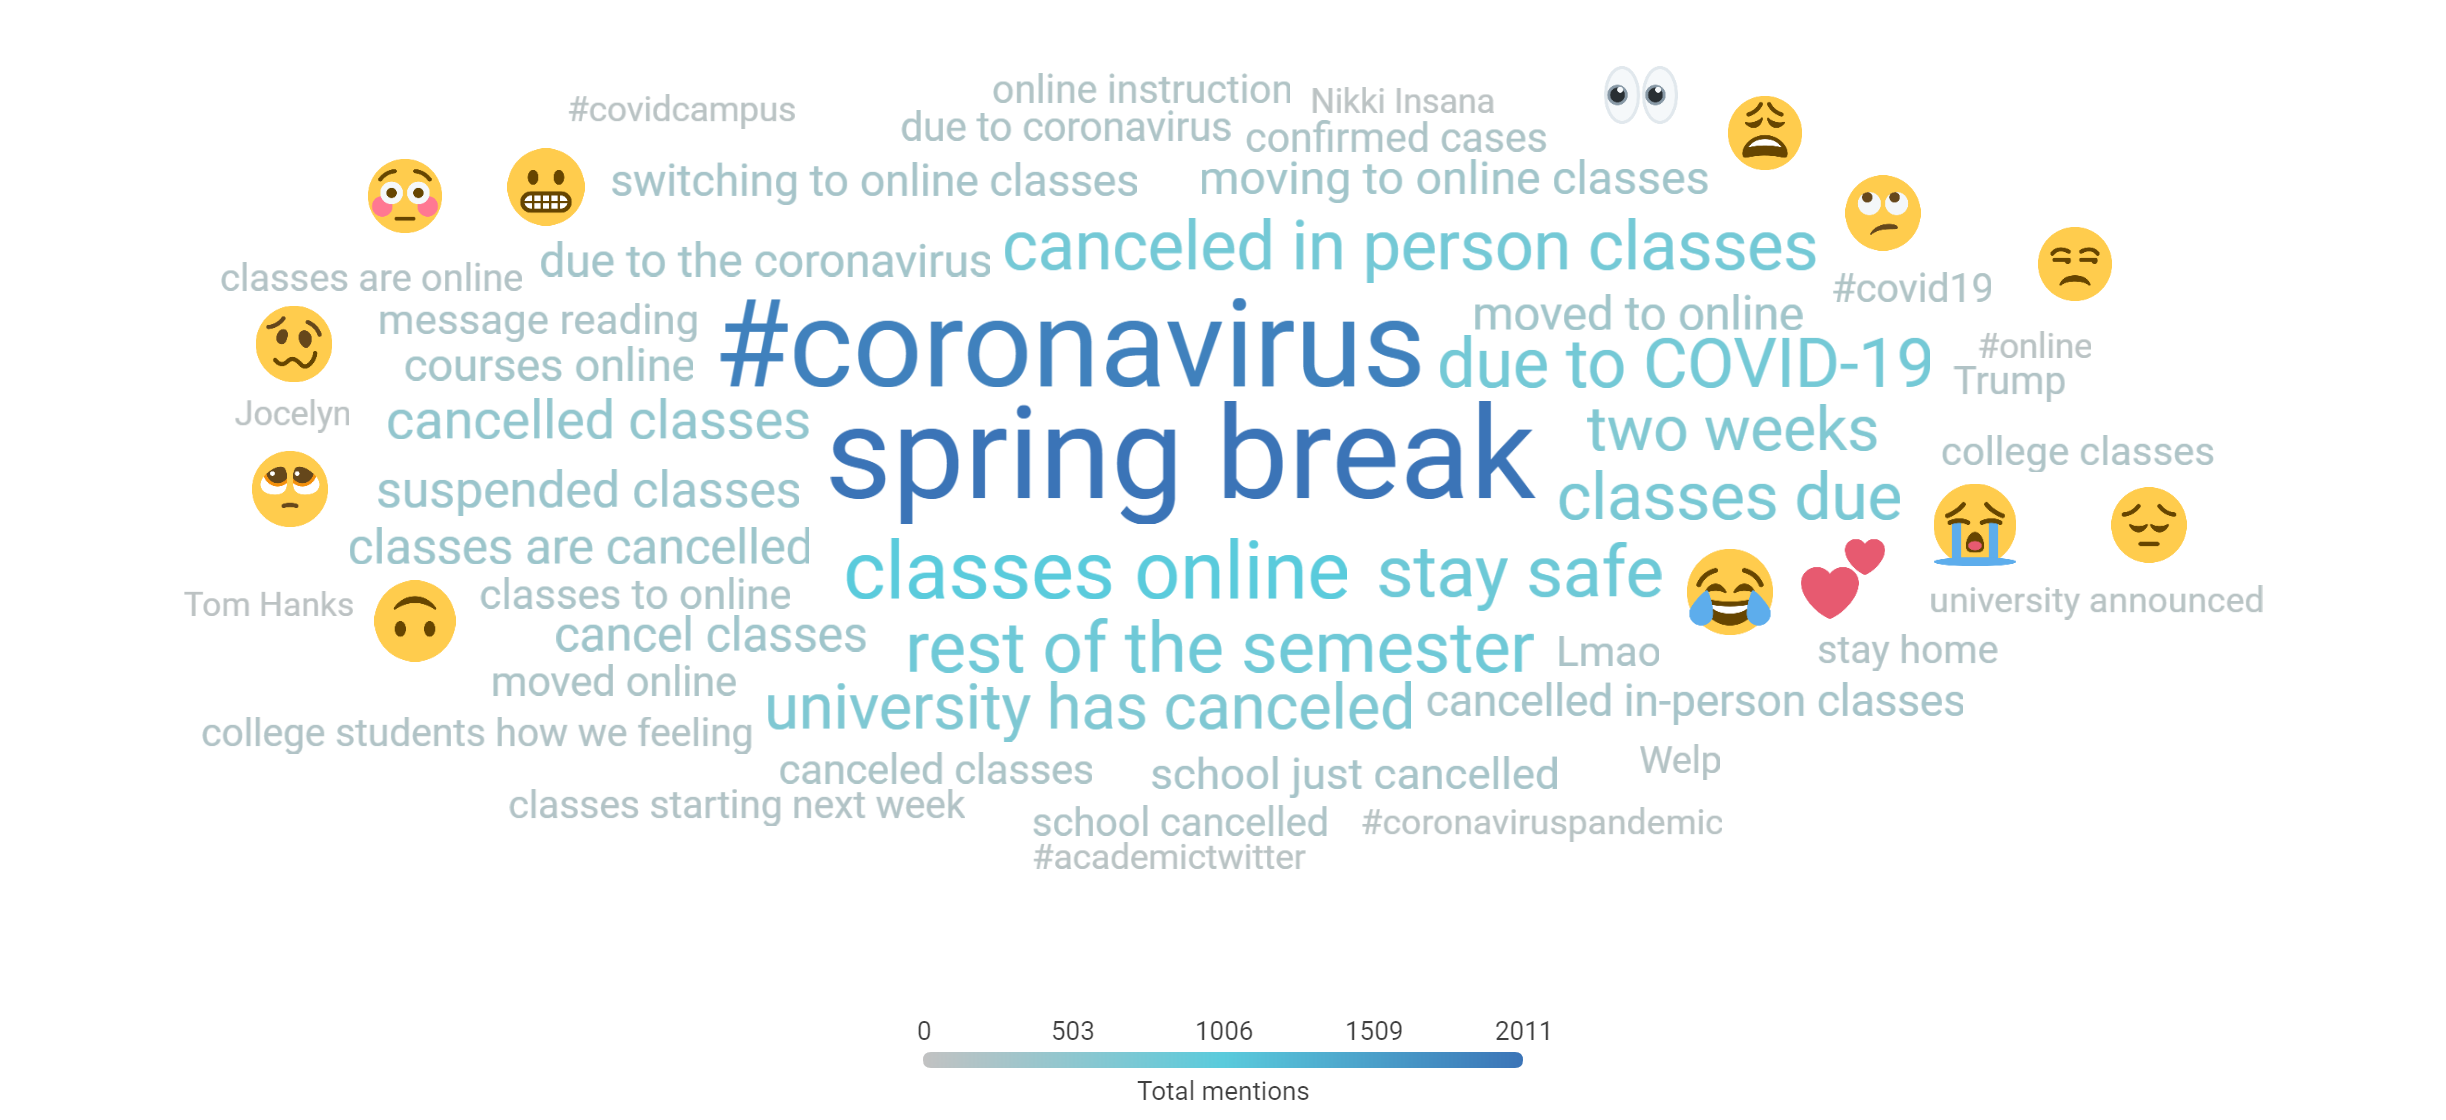 3.13 Briefing Student Audience Topic Cloud-Meme Filter with #coronavirus and spring break the most common topics